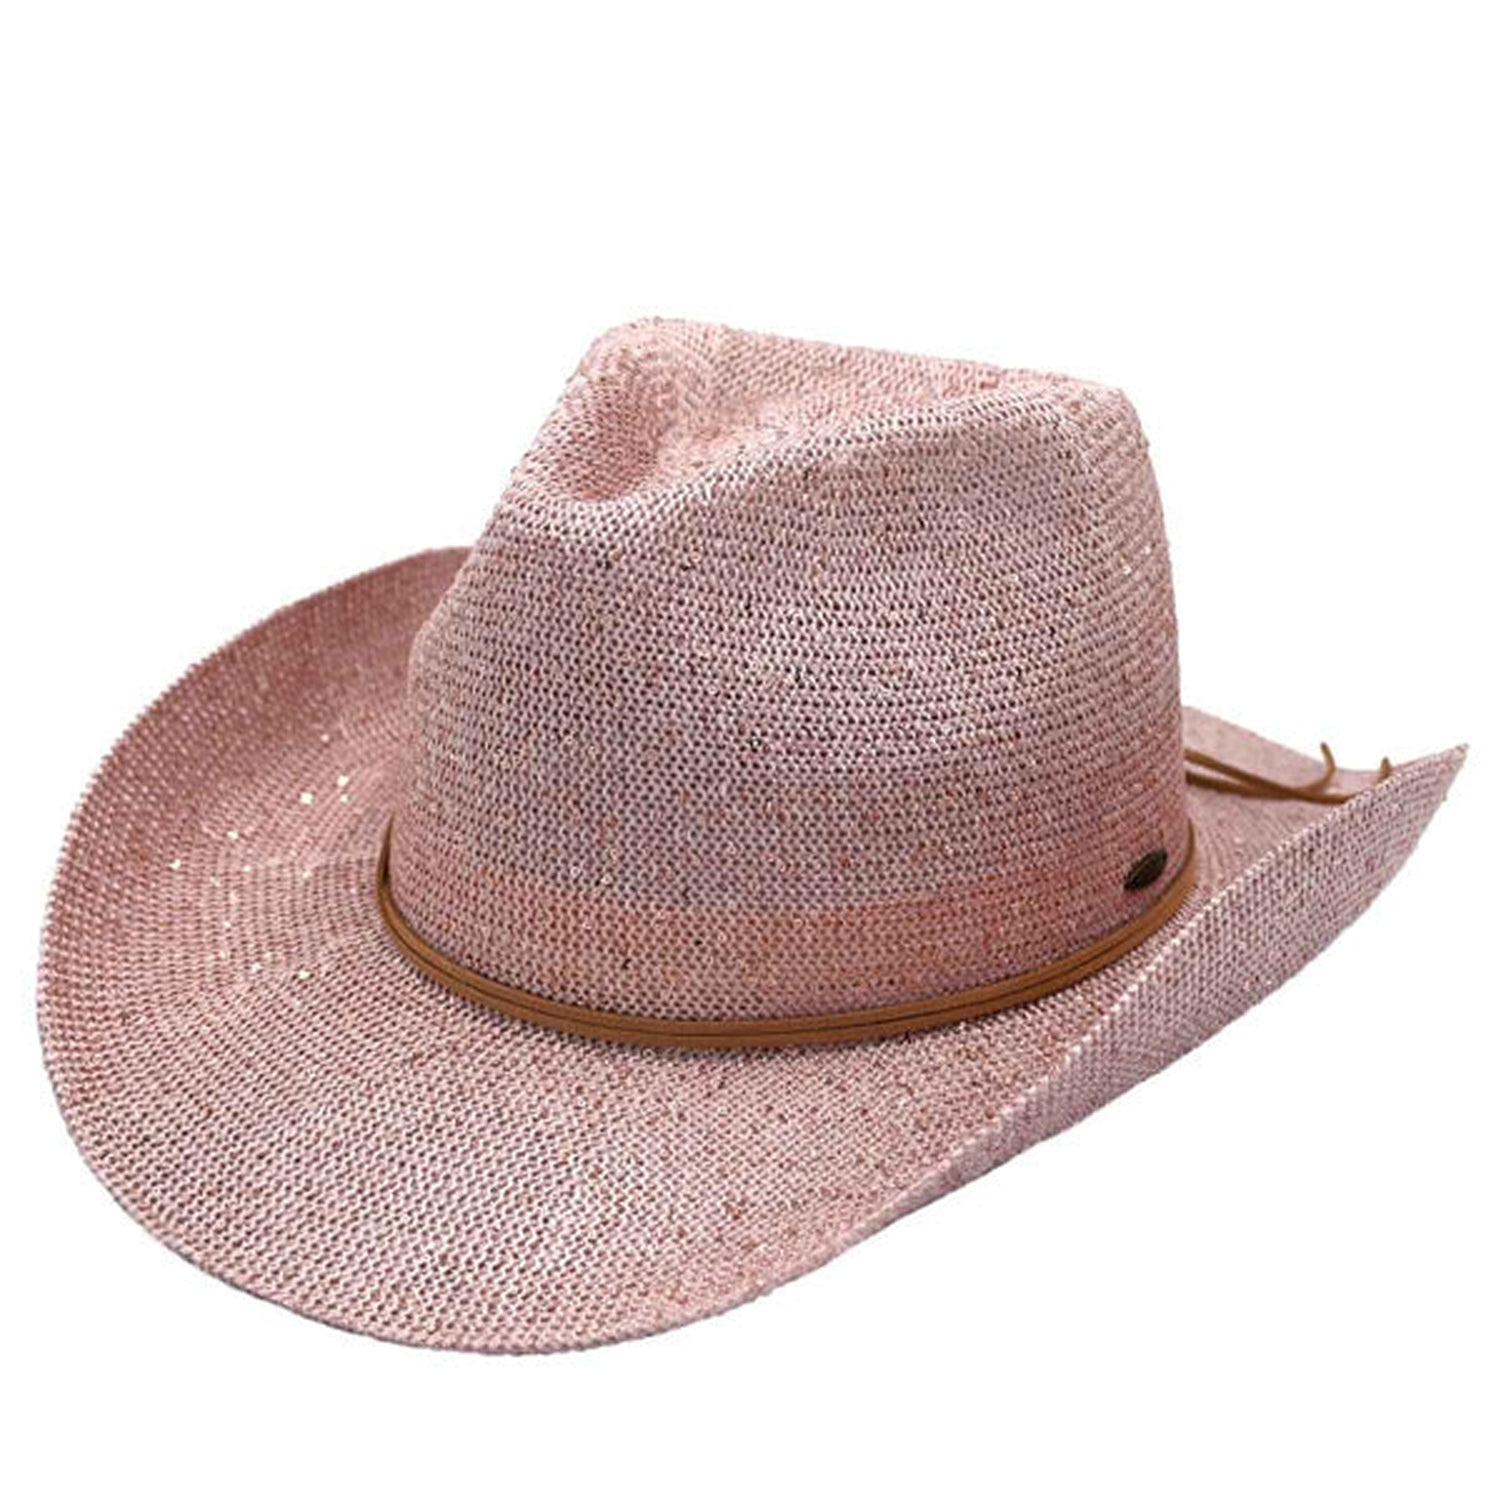 CBC-03 Cowgirl Hat with Glitter Rose